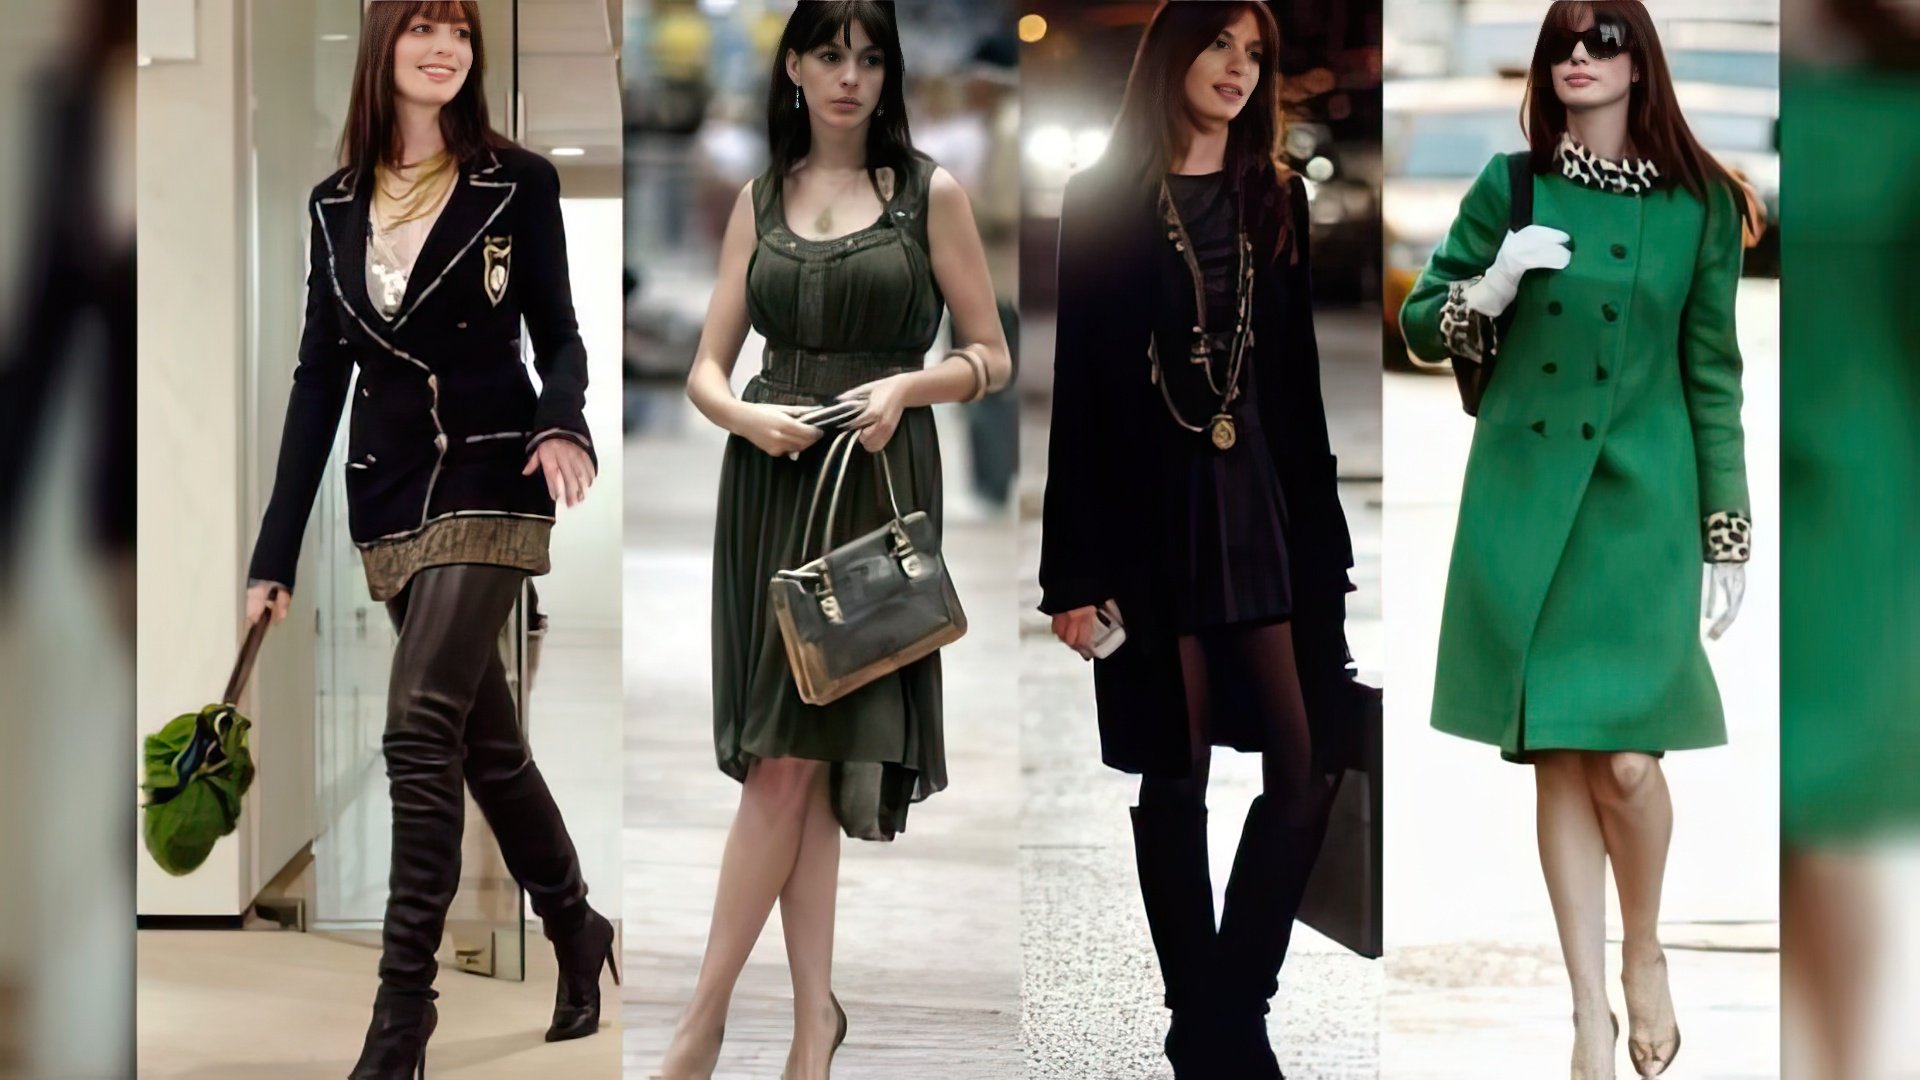 Actress's Outfits from 'The Devil Wears Prada'